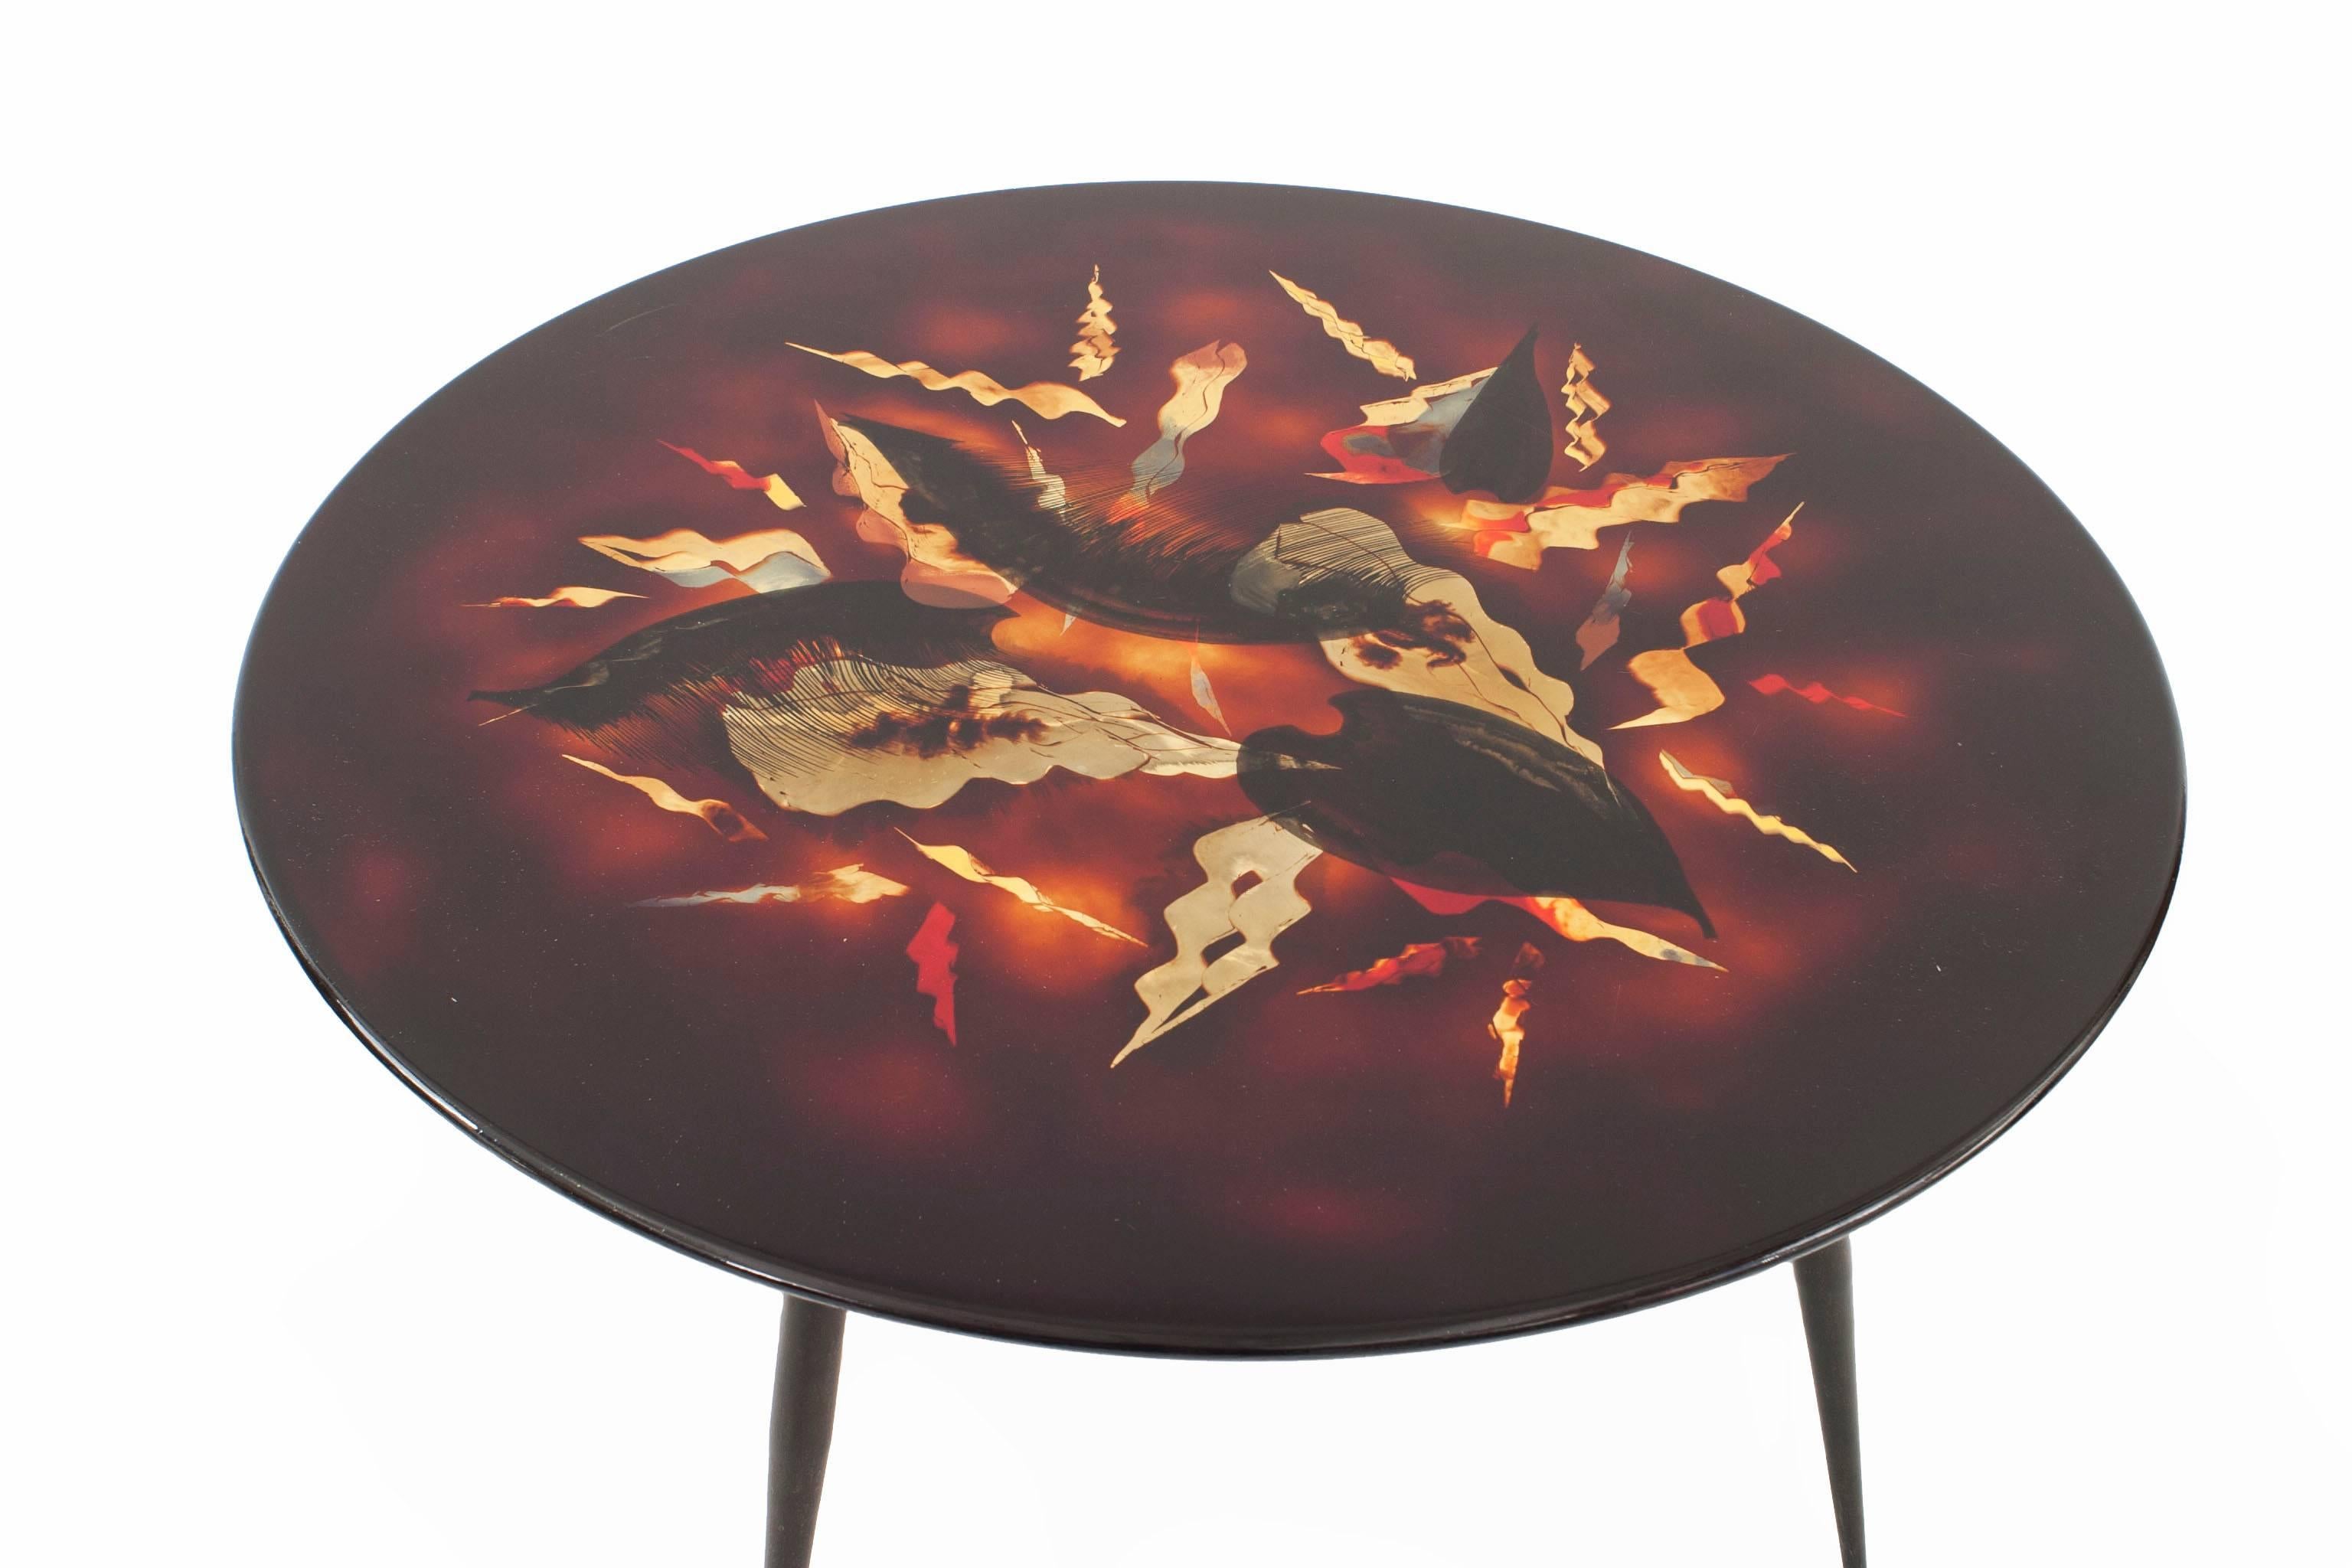 French midcentury low round top coffee table with a black and red geometric stylized leaf design top supported on 4 black metal legs with gilt bronze sabots (signed: BERNARD DUNAND).


Bernard Dunand was the son and close collaborator to Jean